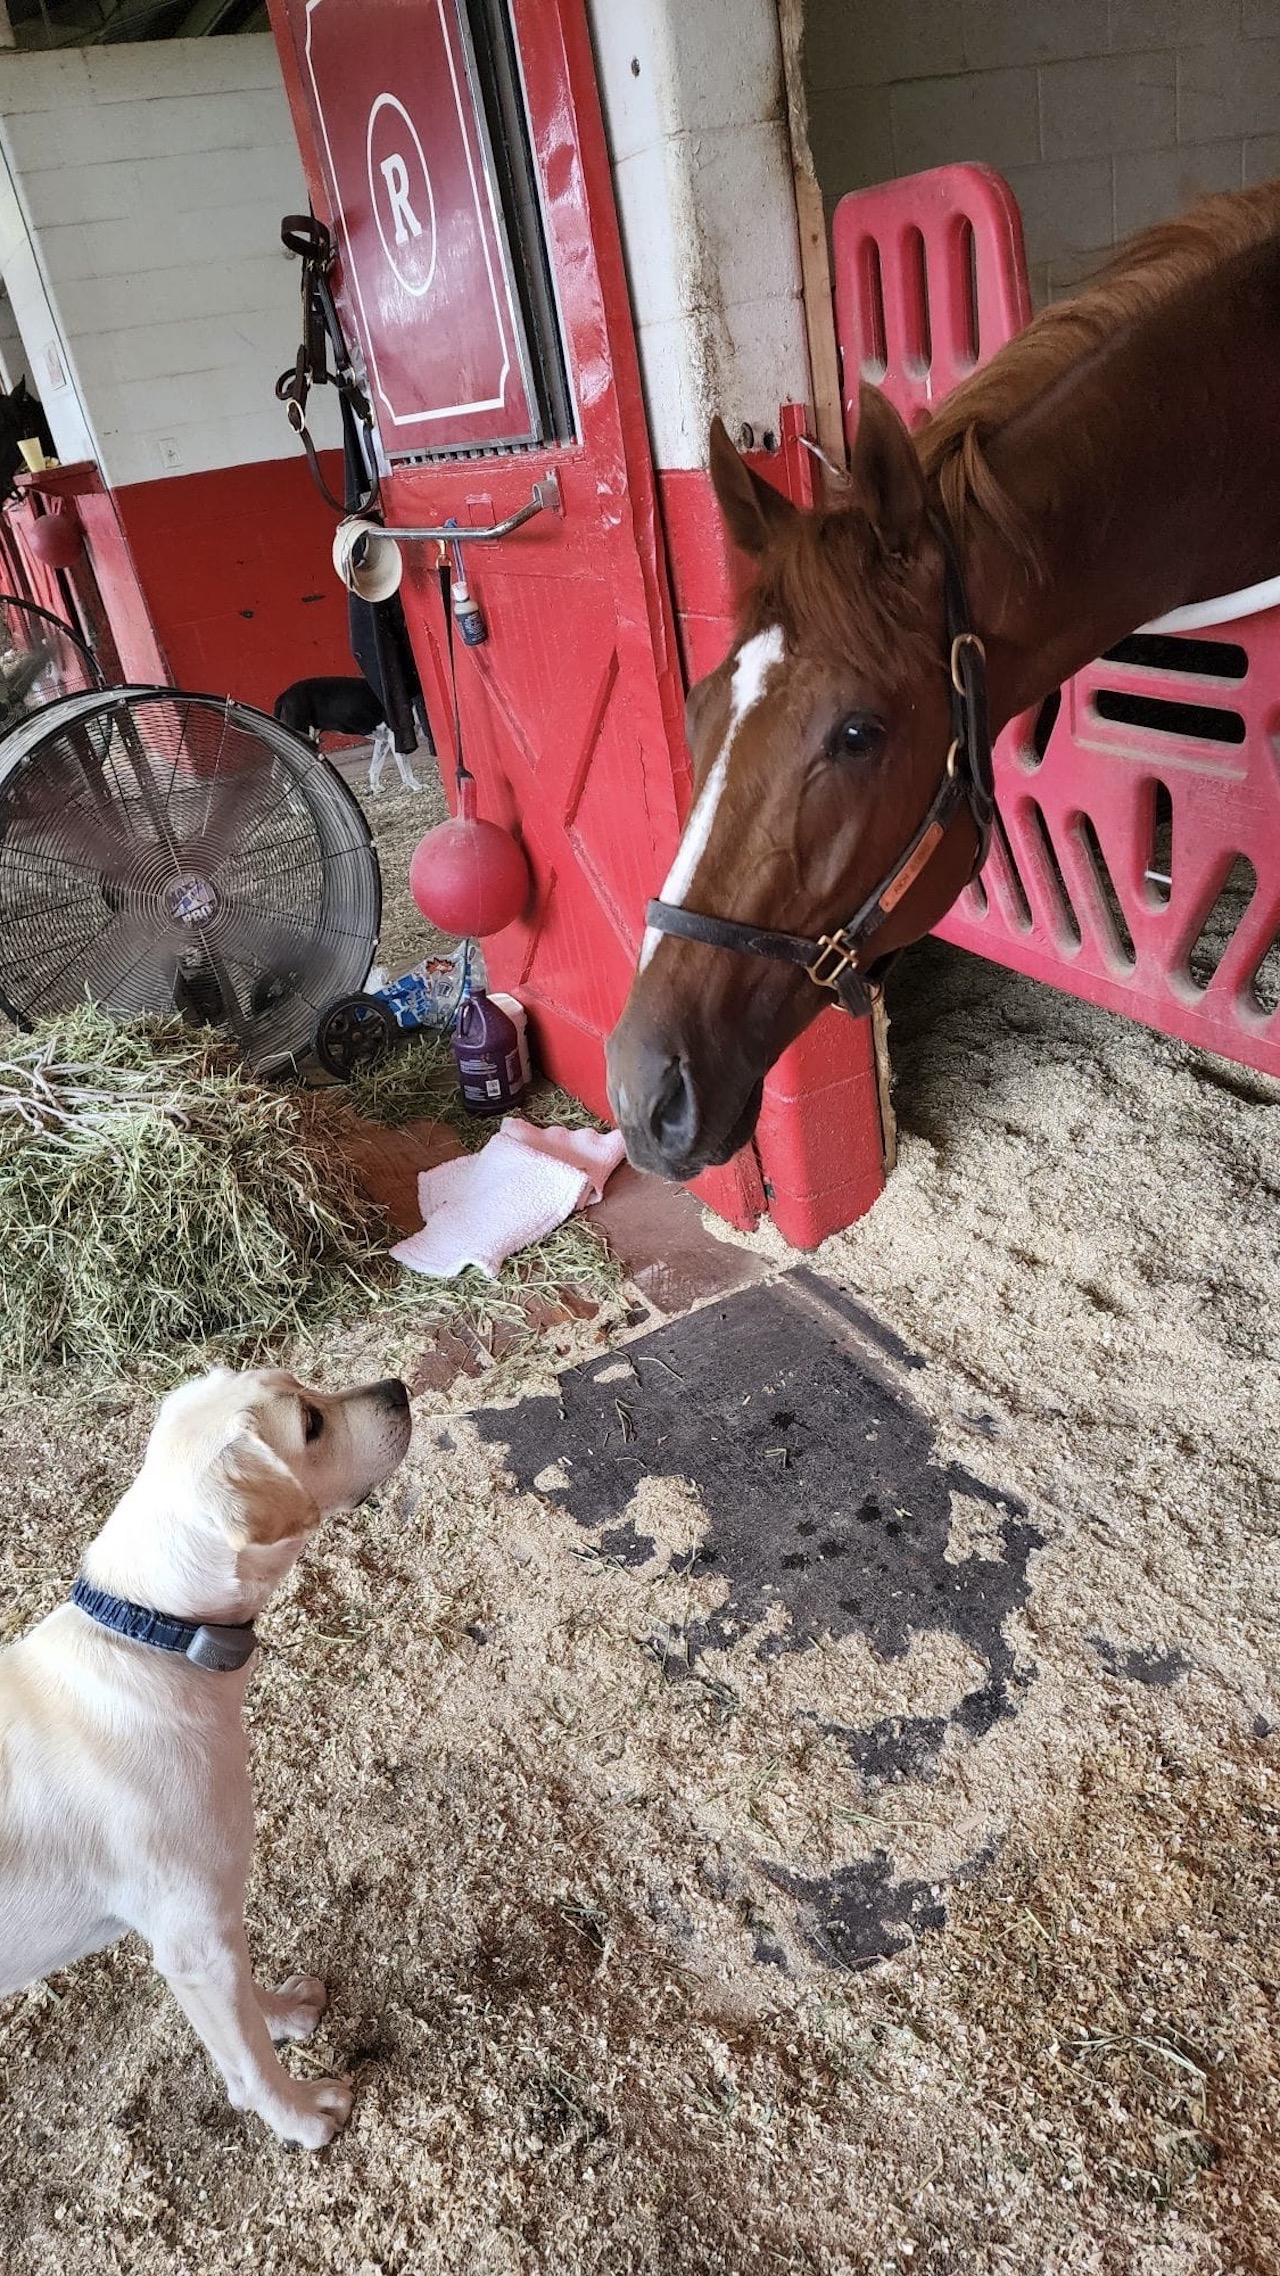 Dog and horse in a horse barn interacting